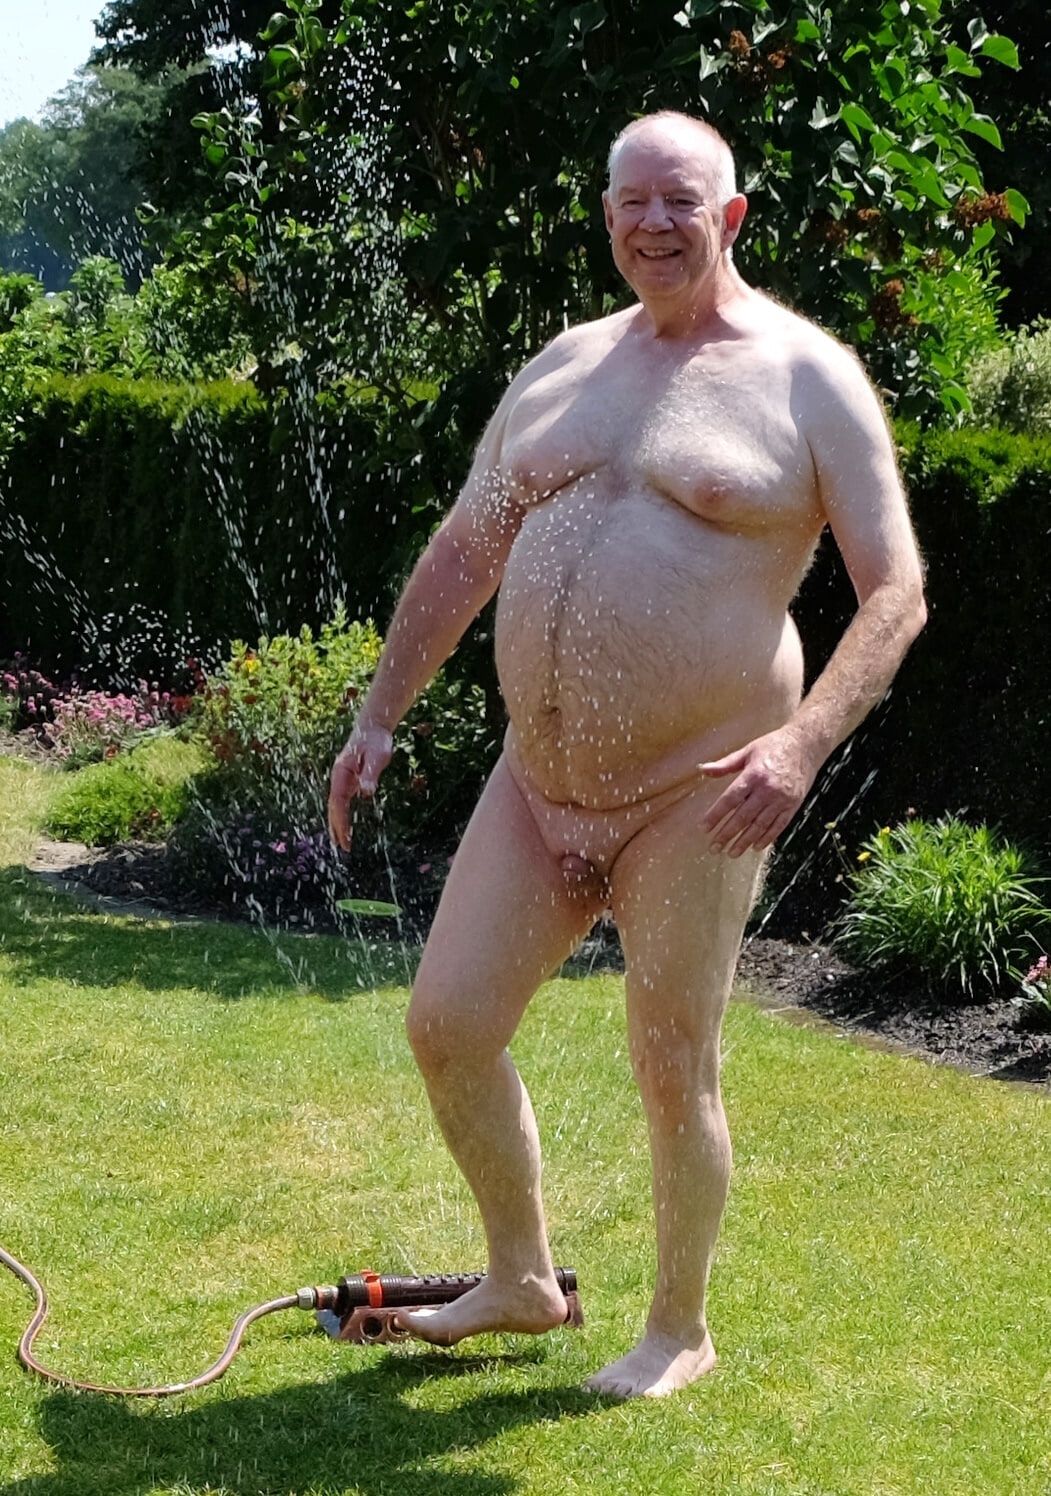 Naked Daddy on the grass #4